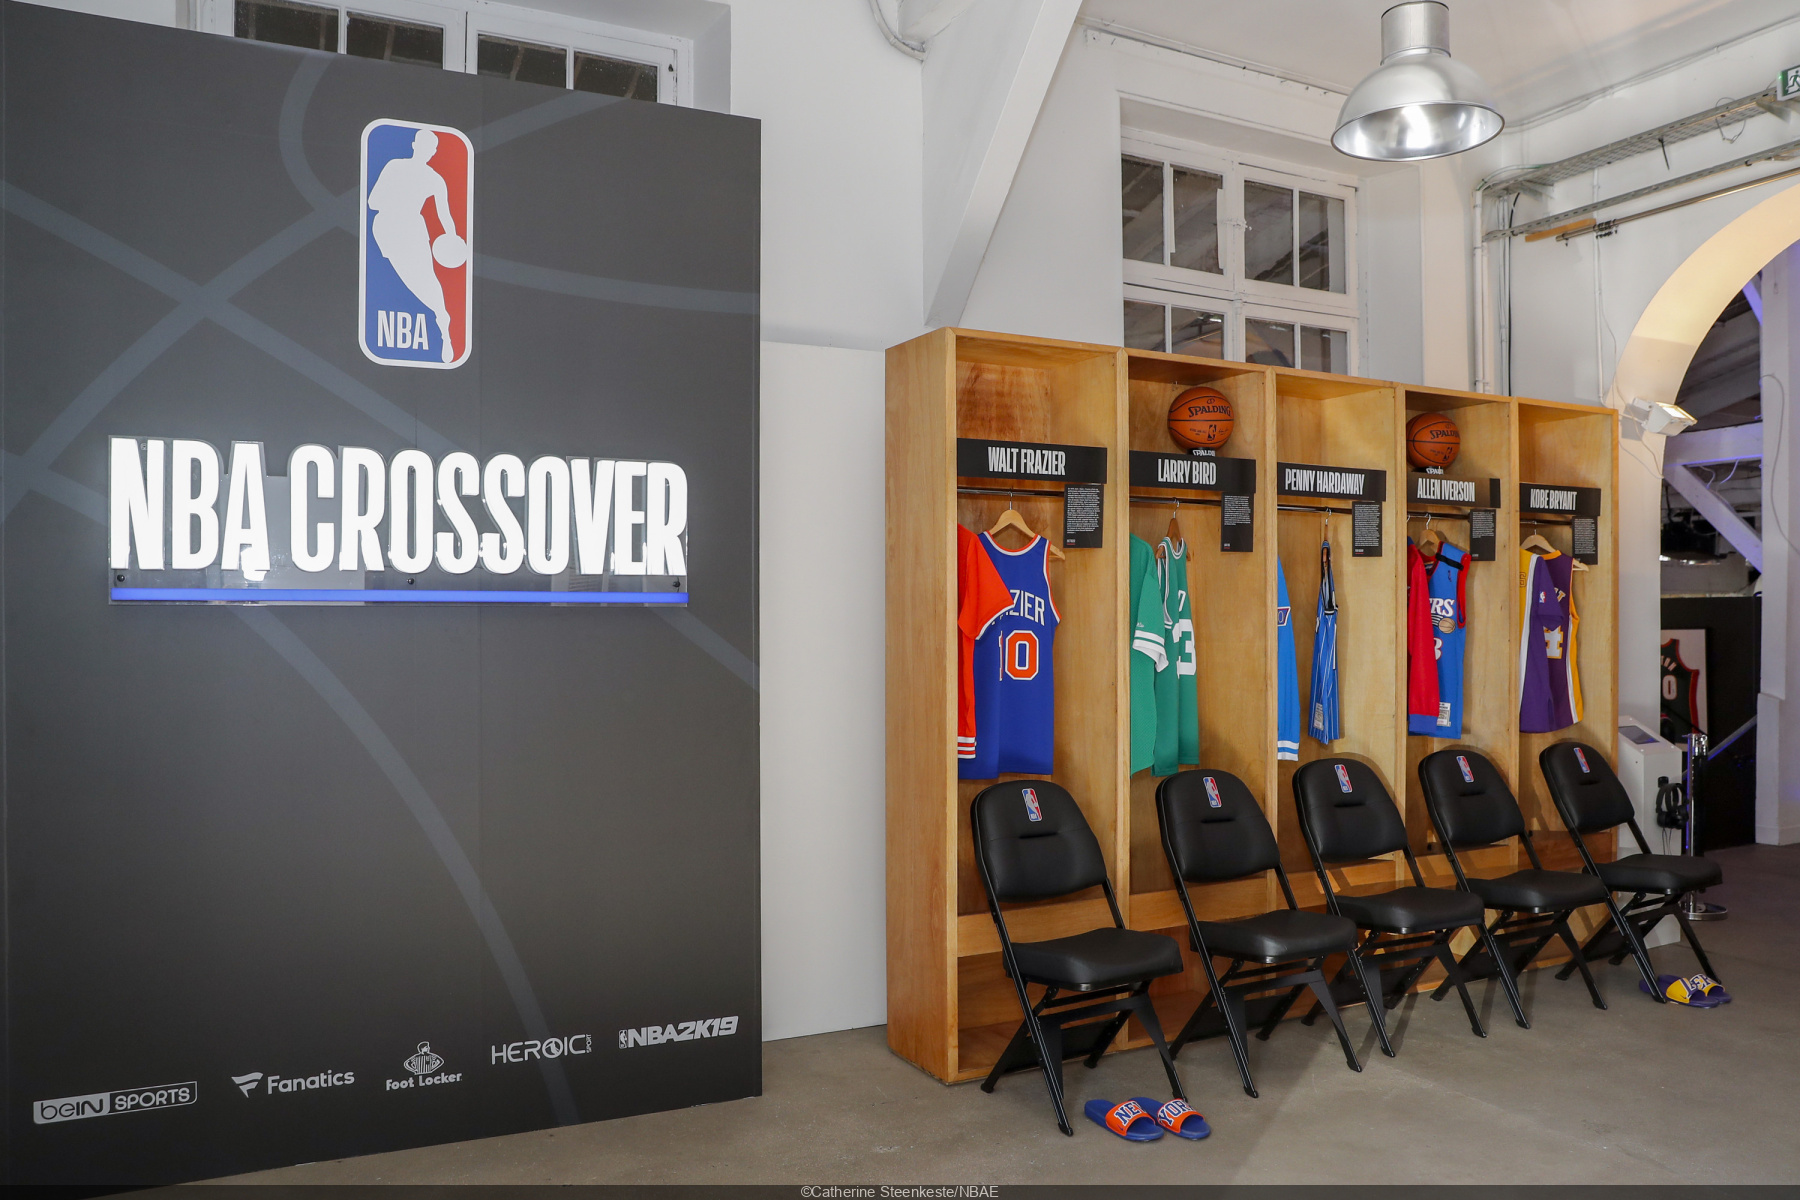 NBA Crossover the exhibition for basketball fans is back